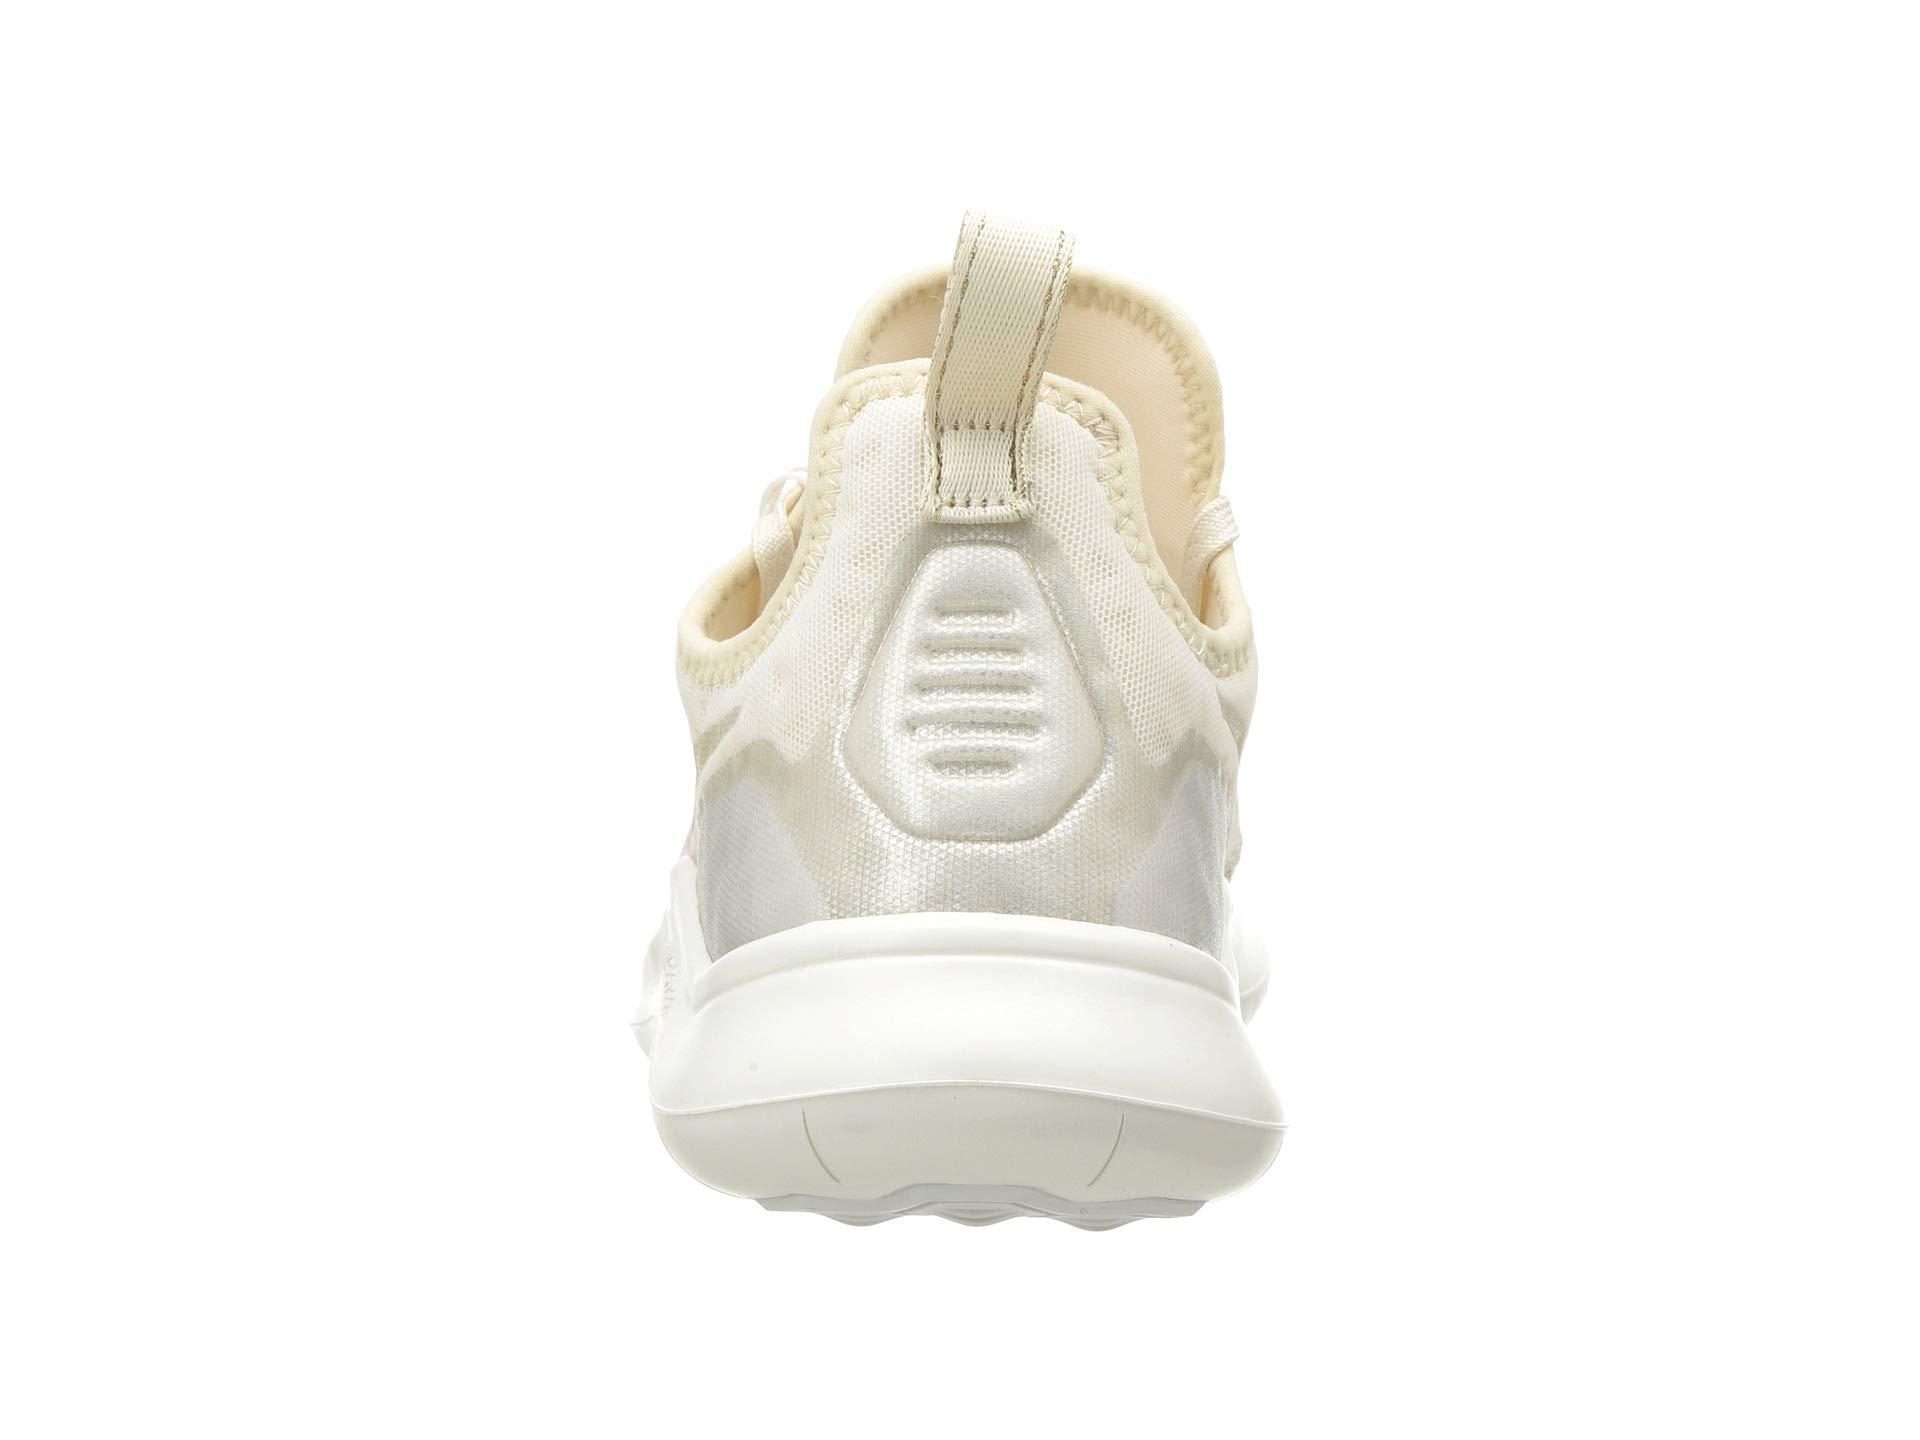 Nike Free Tr 8 Champagne (light Cream/light Cream/platinum Tint) Cross Training Shoes in Natural | Lyst